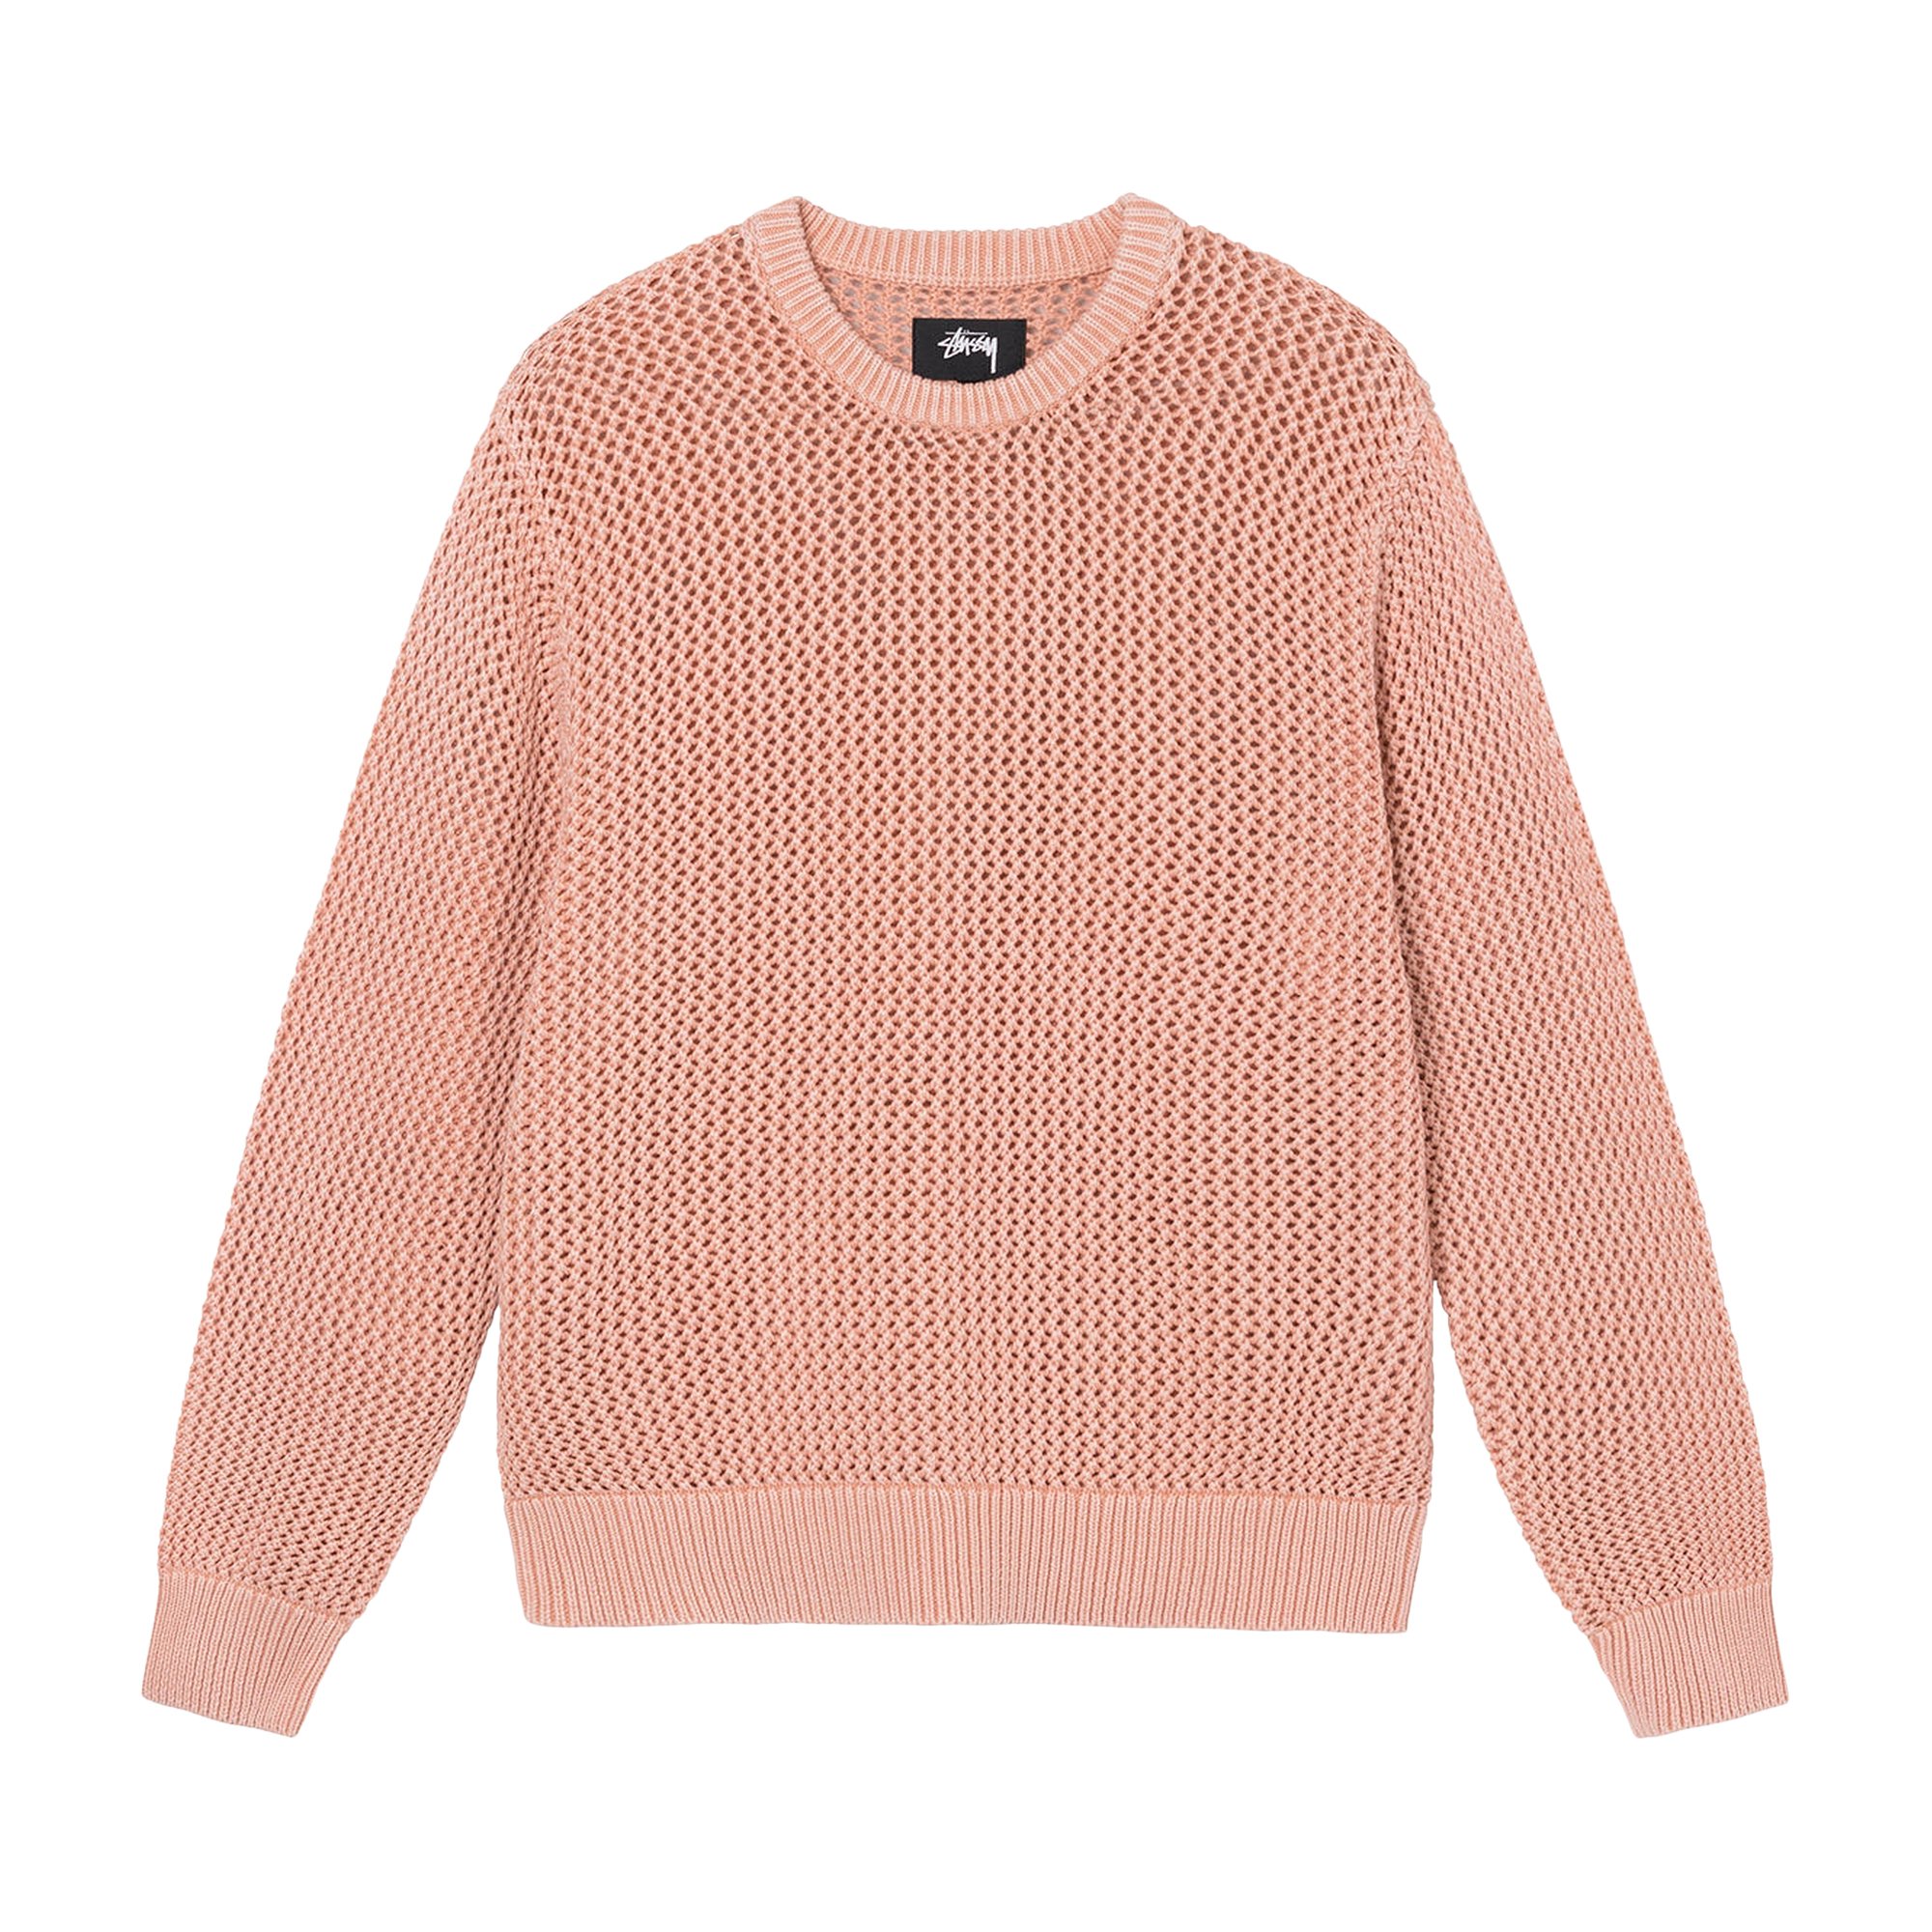 Stussy Pigment Dyed Loose Gauge Sweater 'Peach'